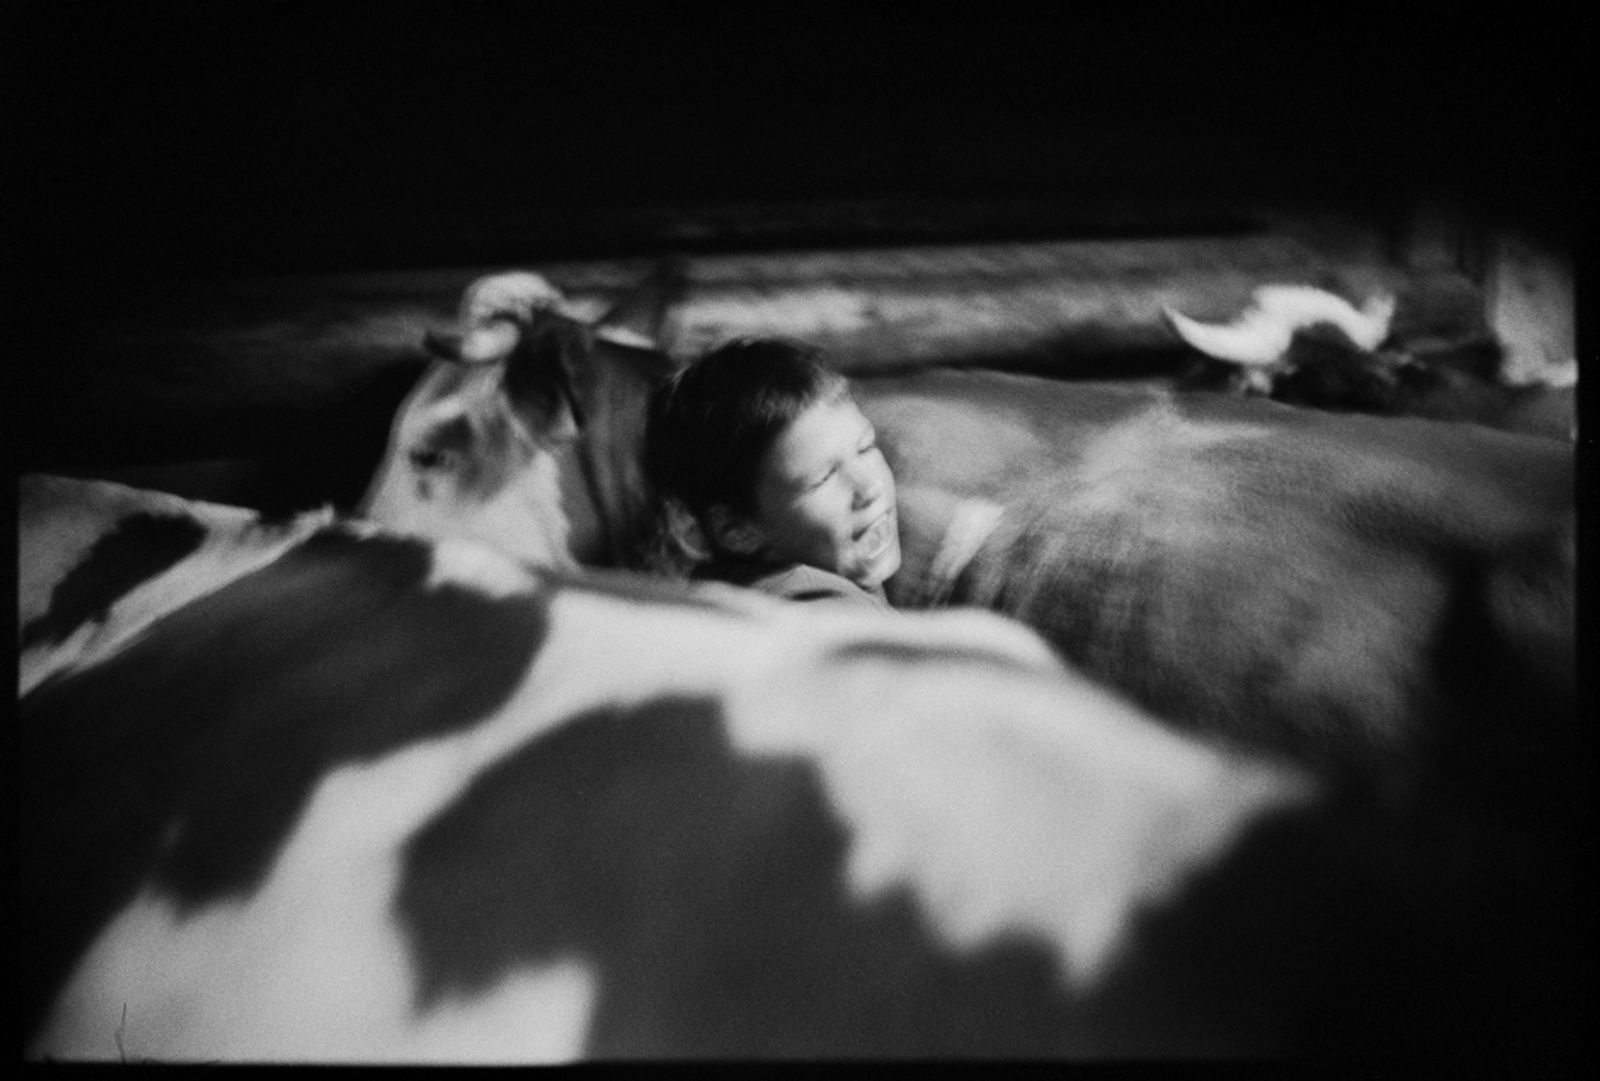 © Jost Franko - Young boy is seen getting crushed between two cows, after trying to tie them in the barn.